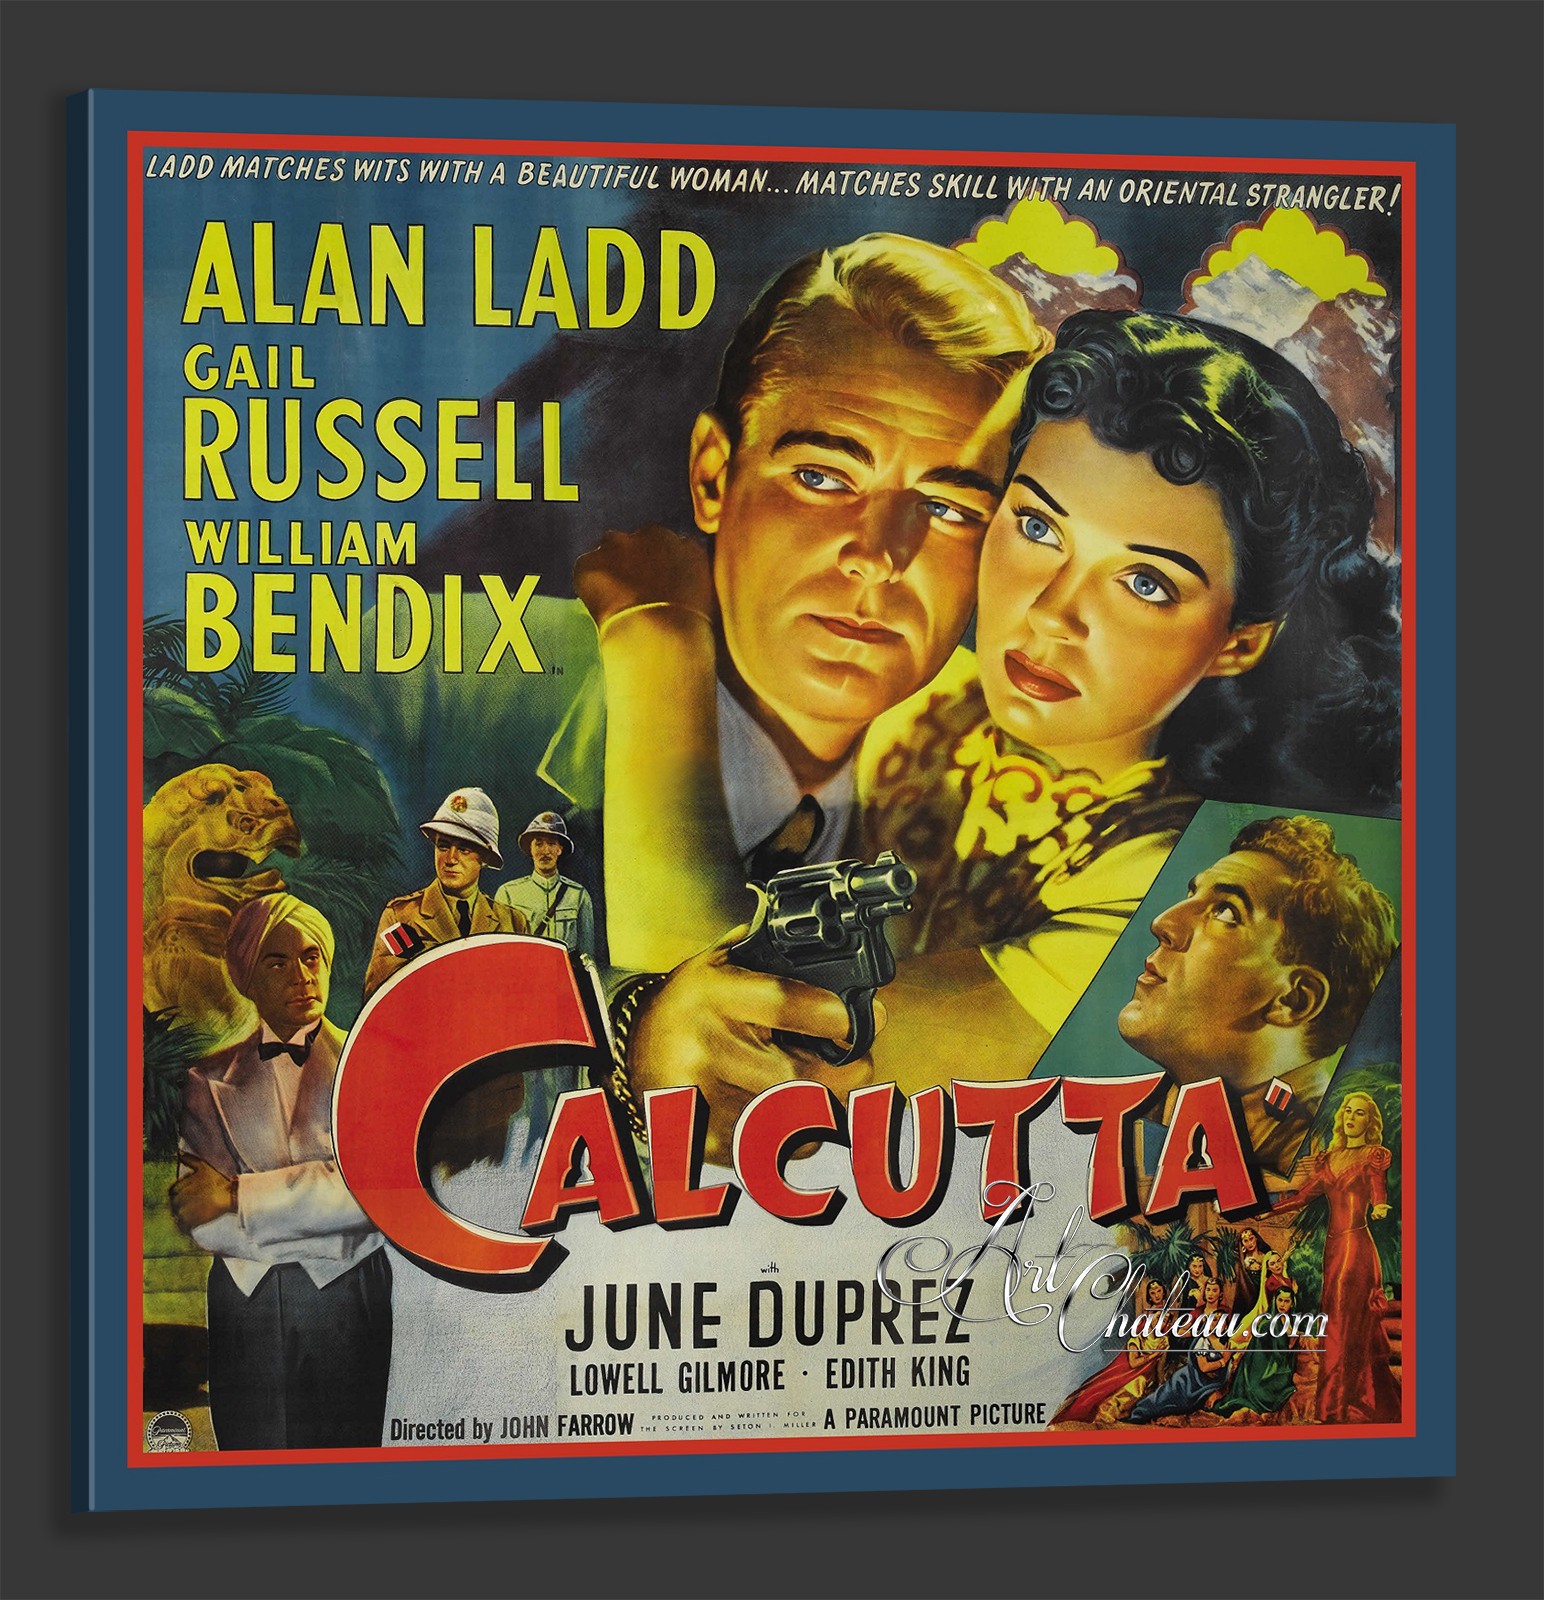 Vintage Style Movie Poster, Titled Calcutta